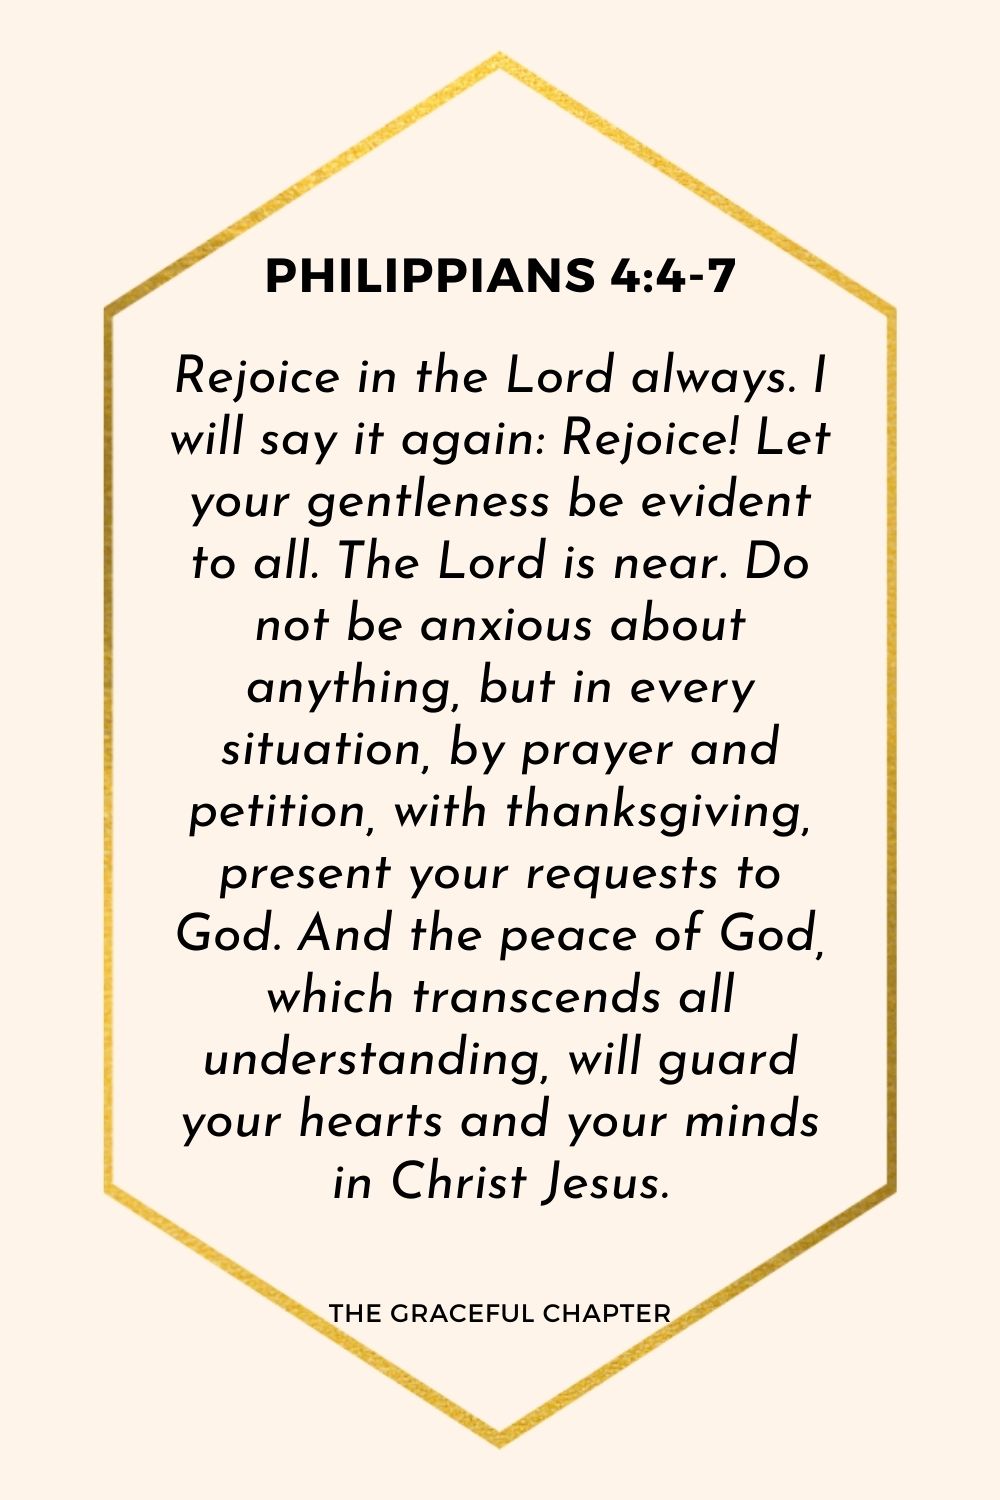 Rejoice in the Lord always. I will say it again: Rejoice! Let your gentleness be evident to all. The Lord is near. Do not be anxious about anything, but in every situation, by prayer and petition, with thanksgiving, present your requests to God. And the peace of God, which transcends all understanding, will guard your hearts and your minds in Christ Jesus.